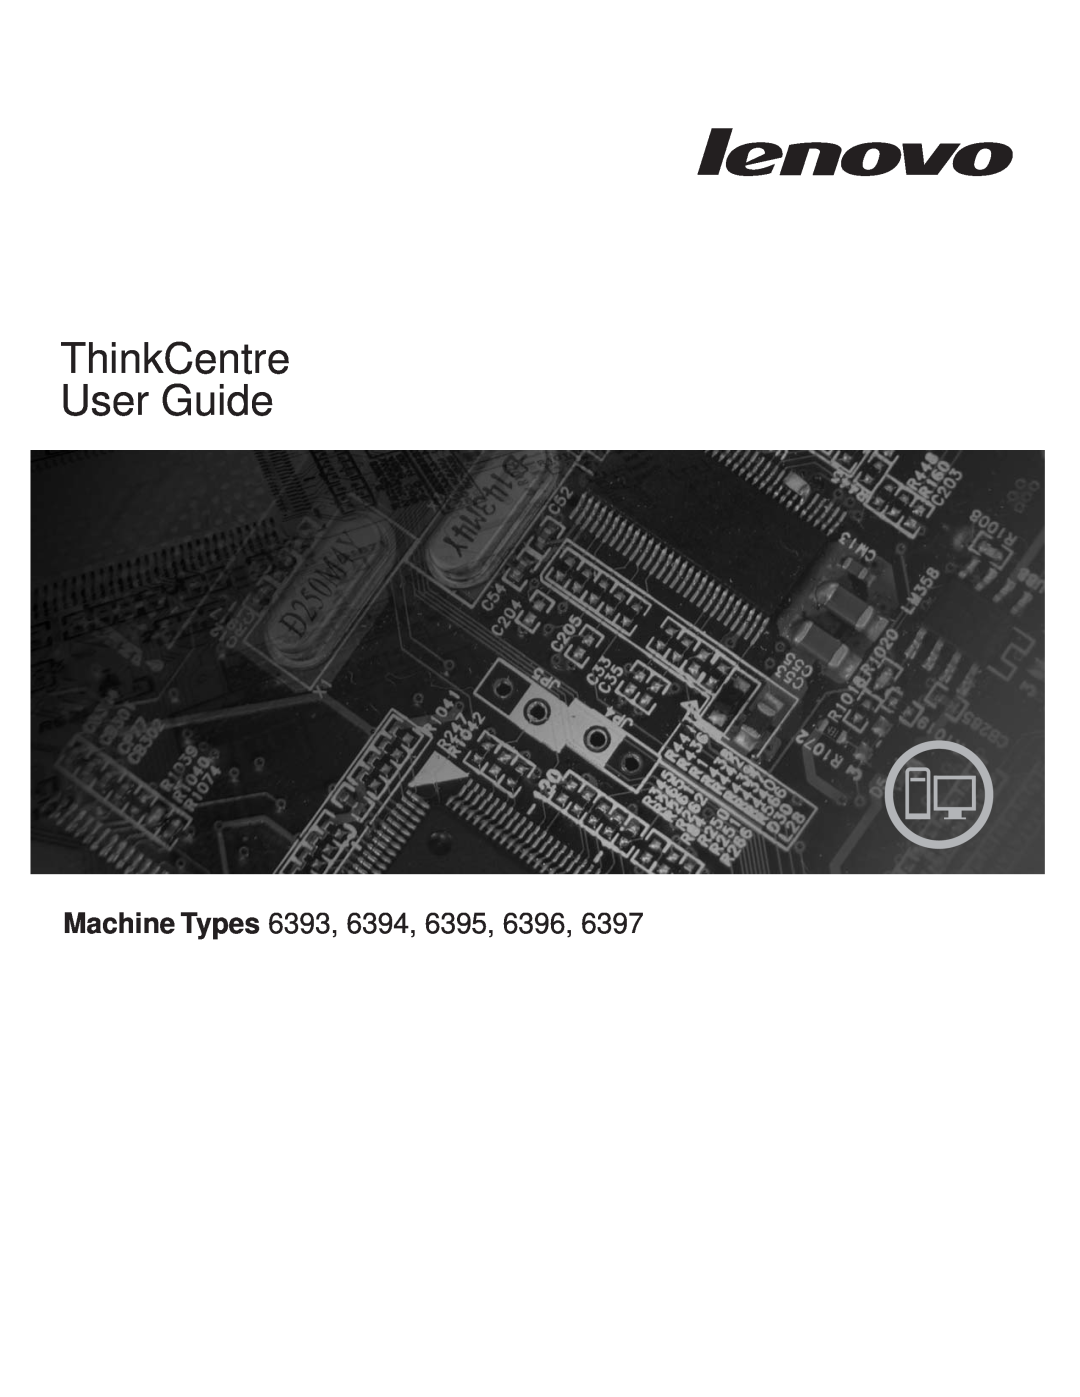 Lenovo 6394, 6395, 6393, 6397, 6396 manual ThinkCentre User Guide, Machine Types 